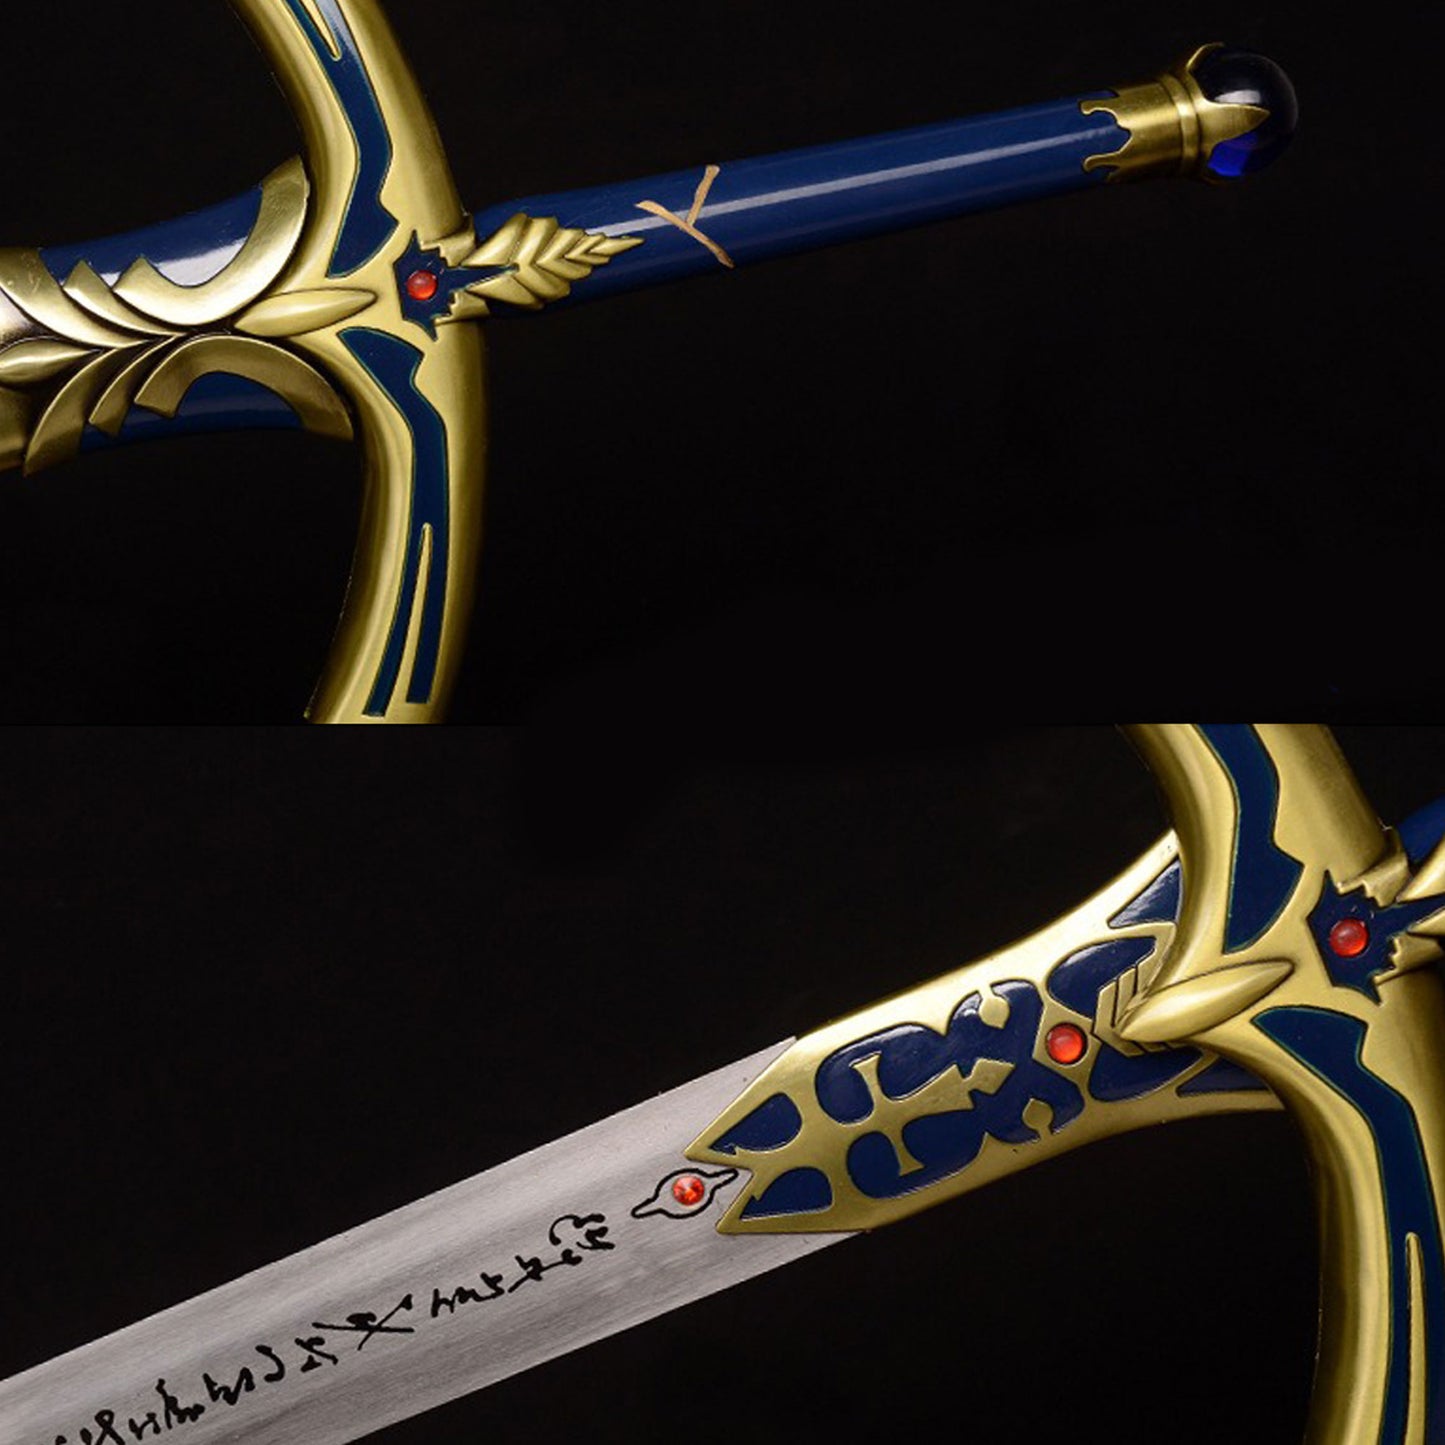 Excalibur Sword Of Promised Victory Life-size Metal Replica